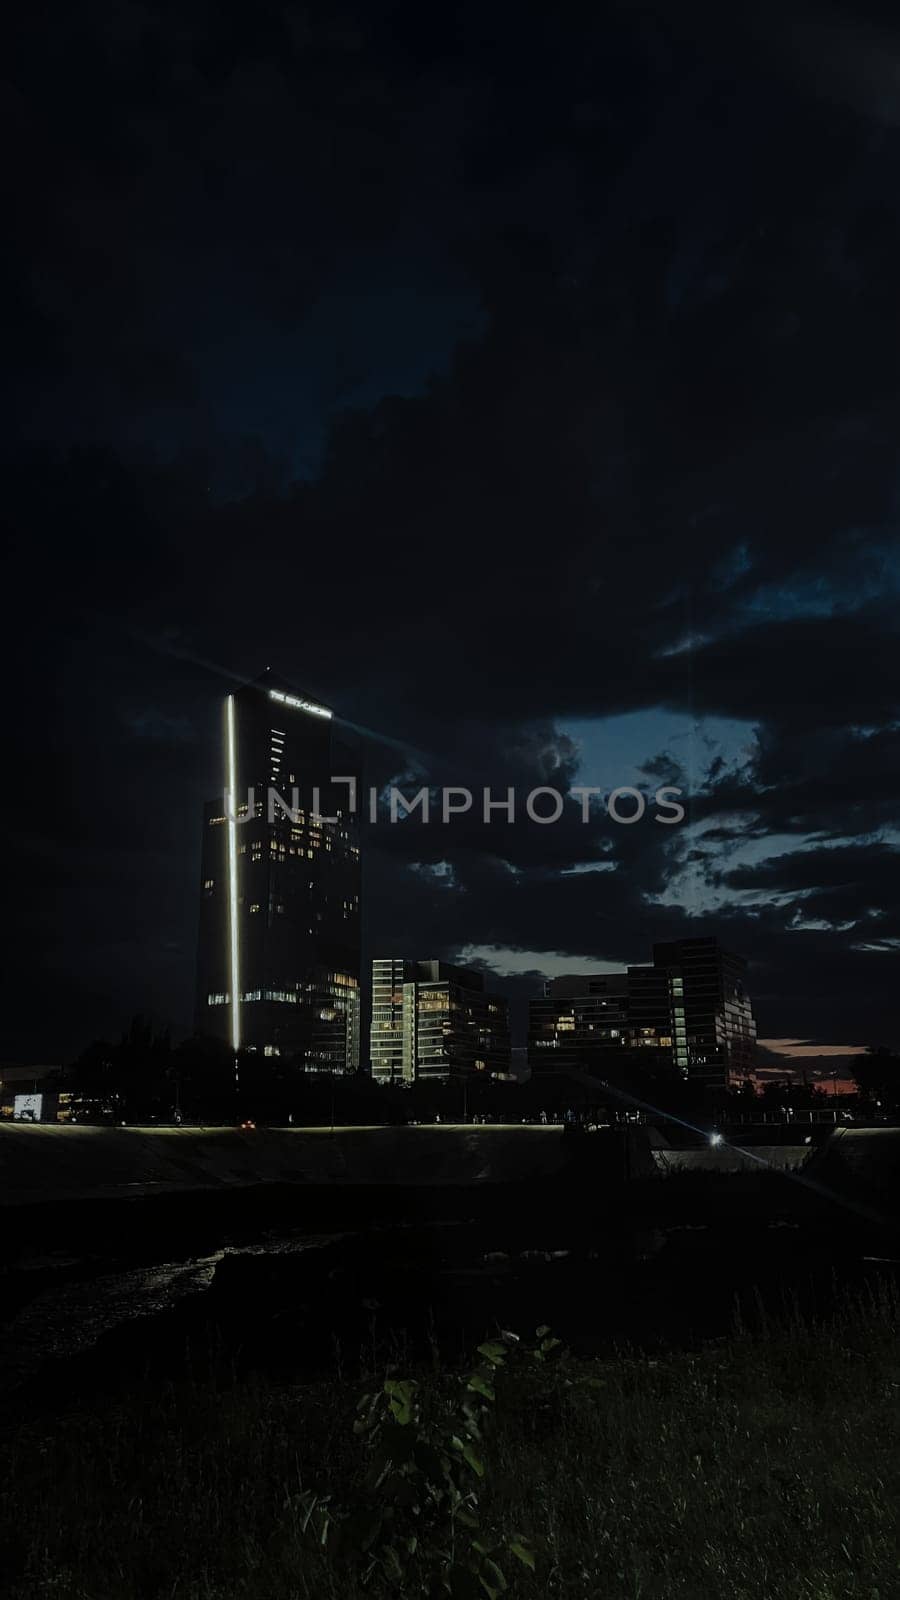 A tall skyscraper stands out among other buildings in the city at night. The sky is dark and cloudy, with a hint of light on the horizon.